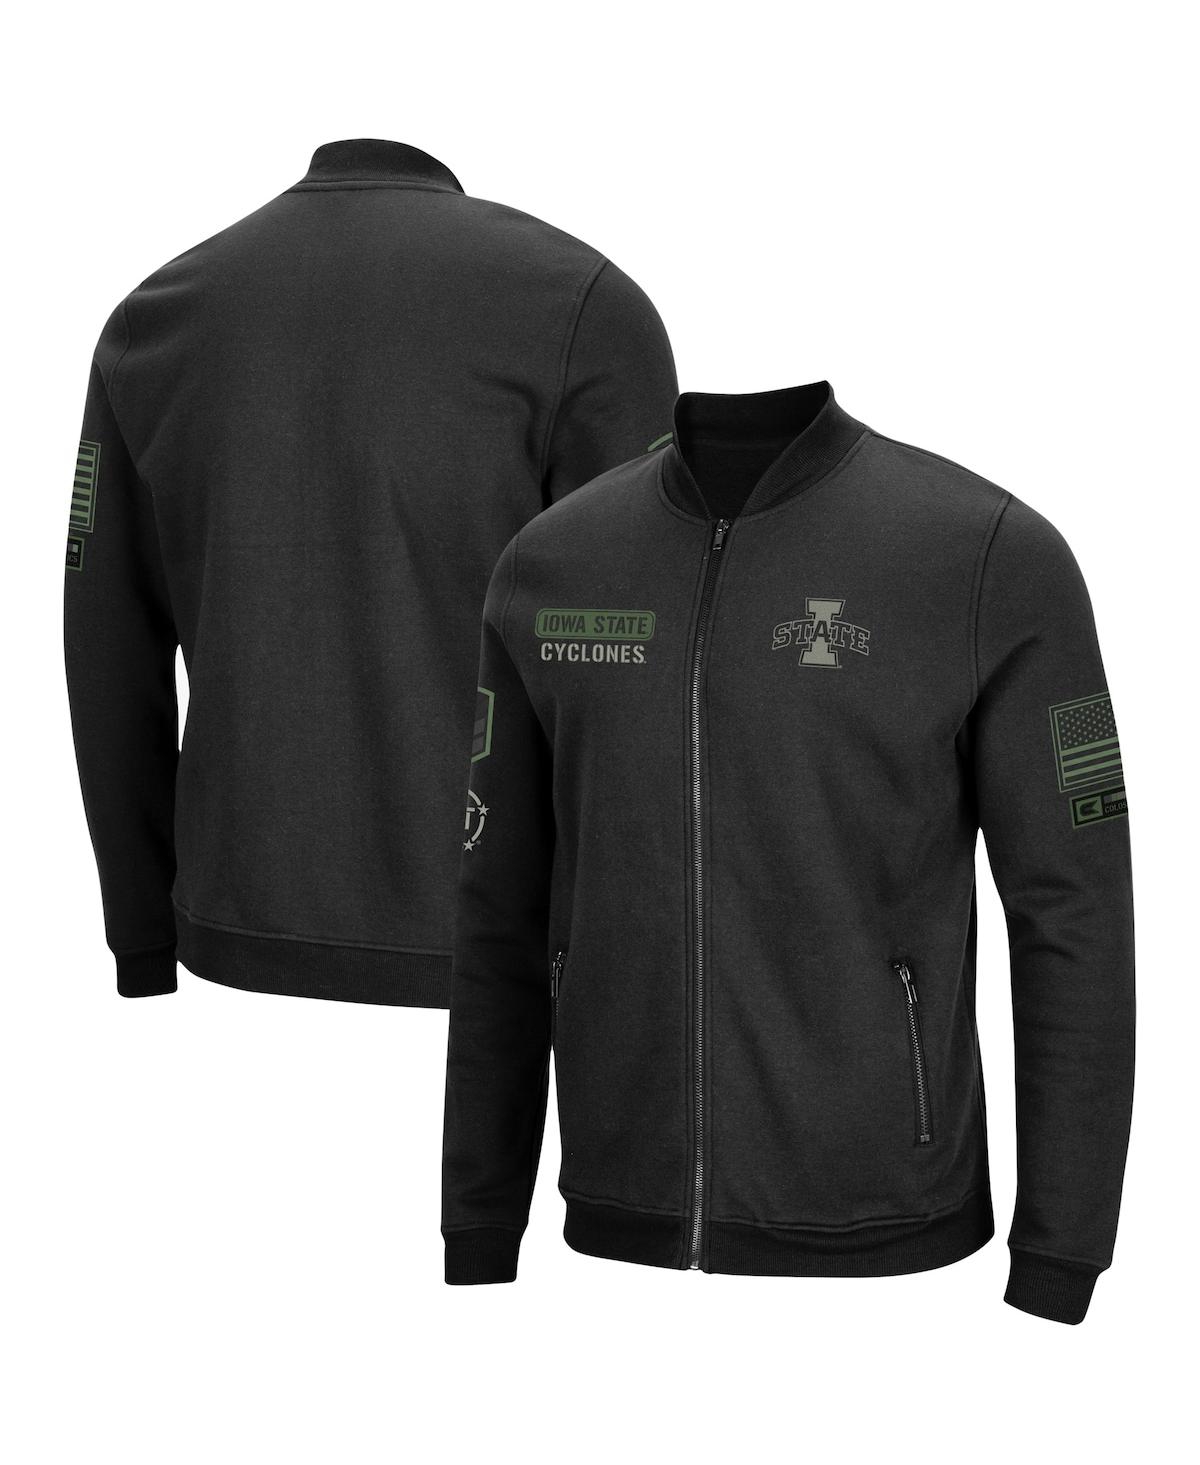 Men's Colosseum Black Iowa State Cyclones Oht Military-Inspired Appreciation Team High-Speed Bomber Full-Zip Jacket - Black